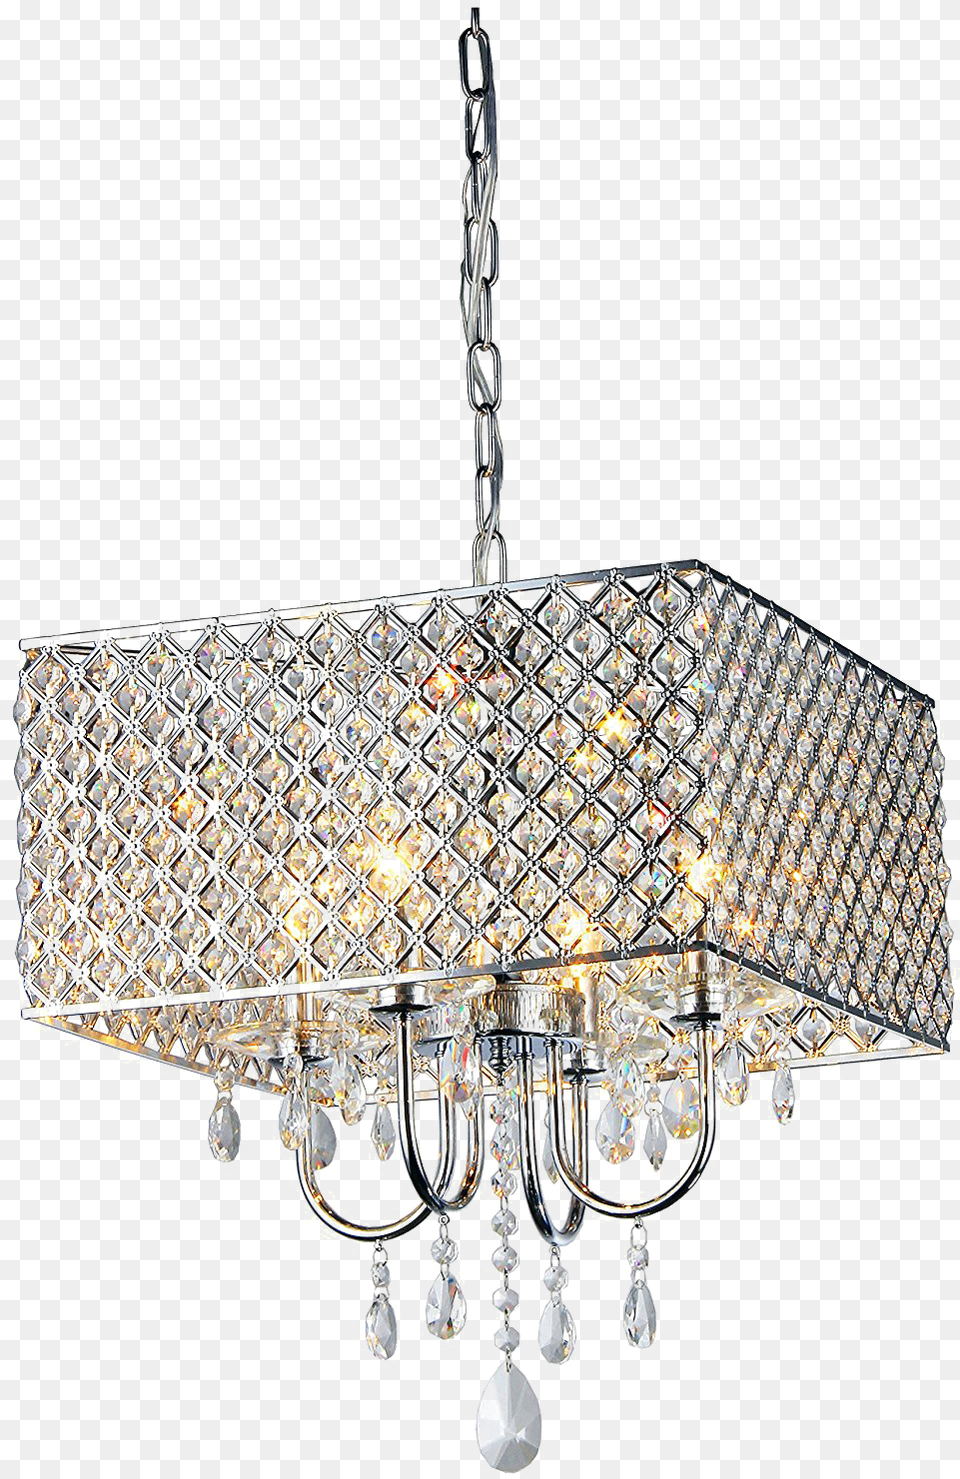 Hanging Chandelier Image Whse Of Tiffany Rl5623 Royal Crystal Chandelier, Lamp Png